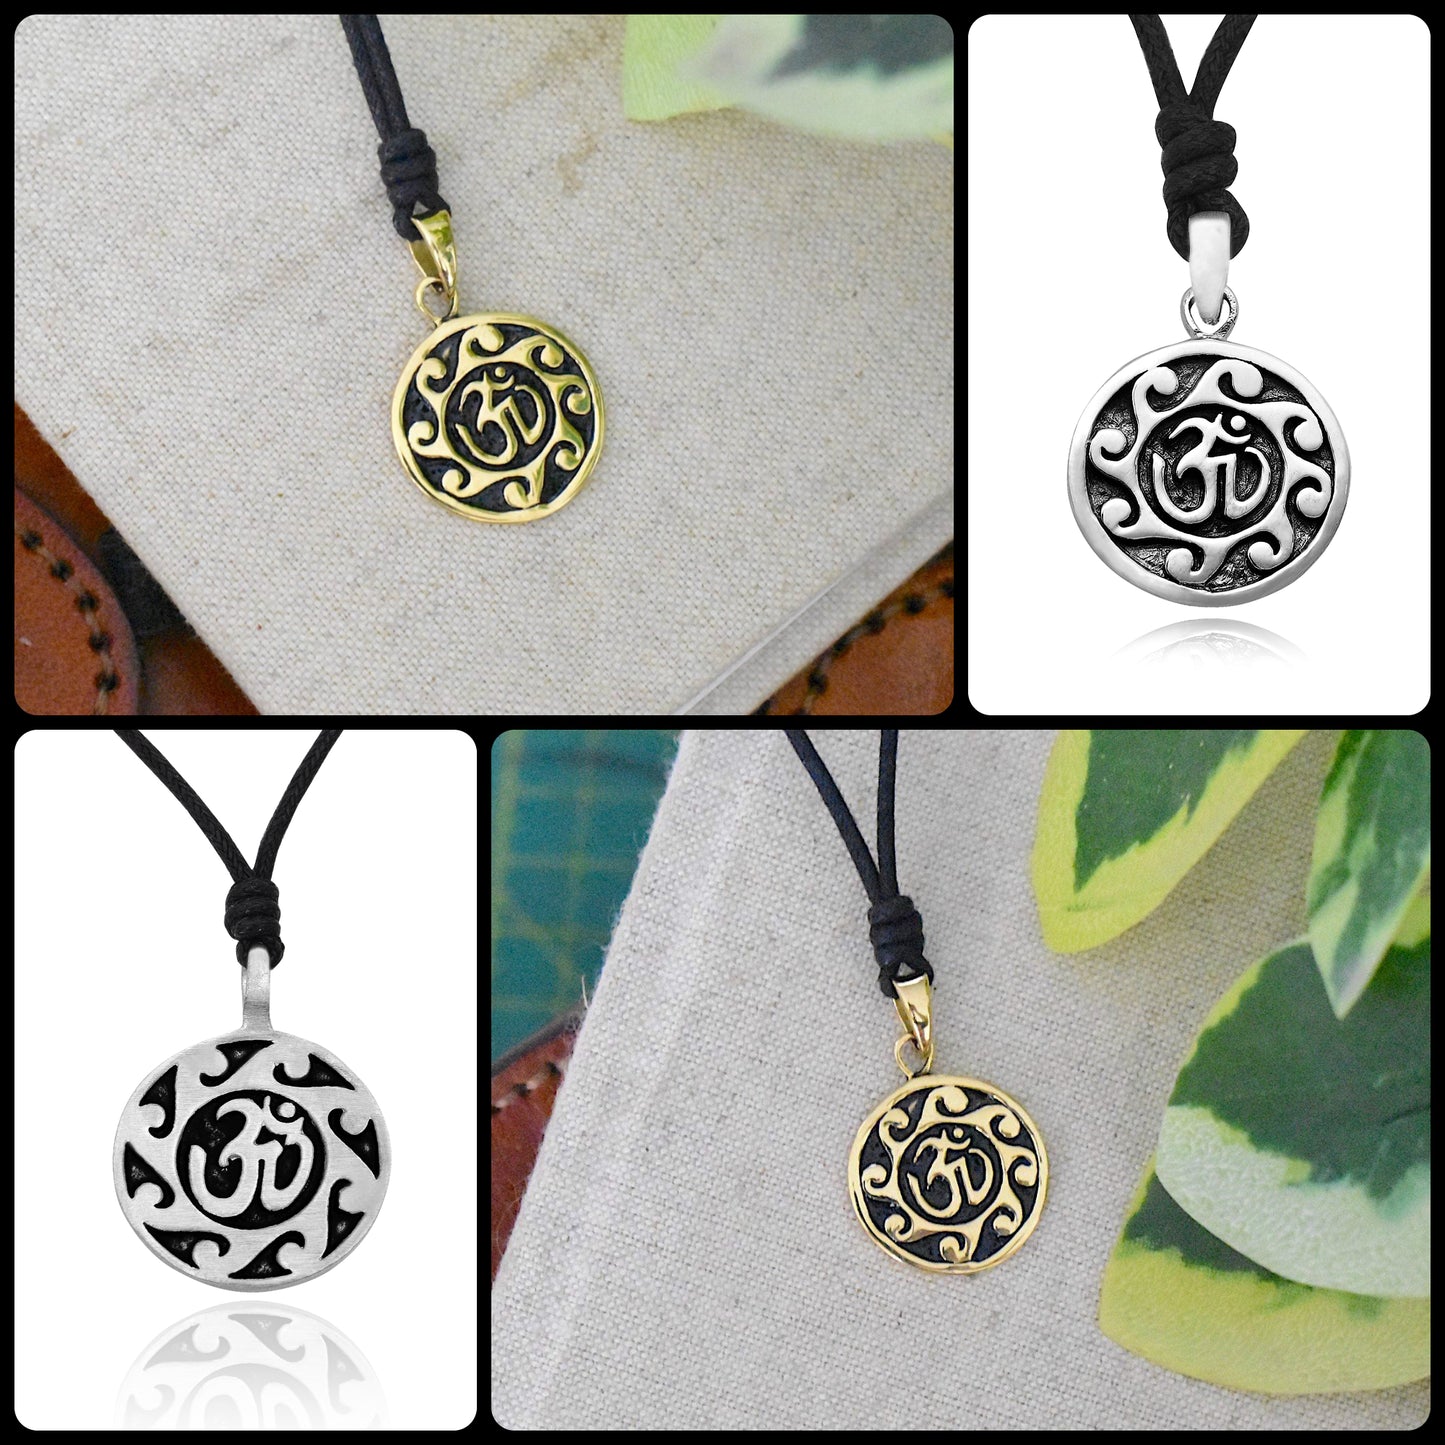 Unique Hindu Symbol Sterling Silver Pewter Brass Charm Necklace Pendant Jewelry